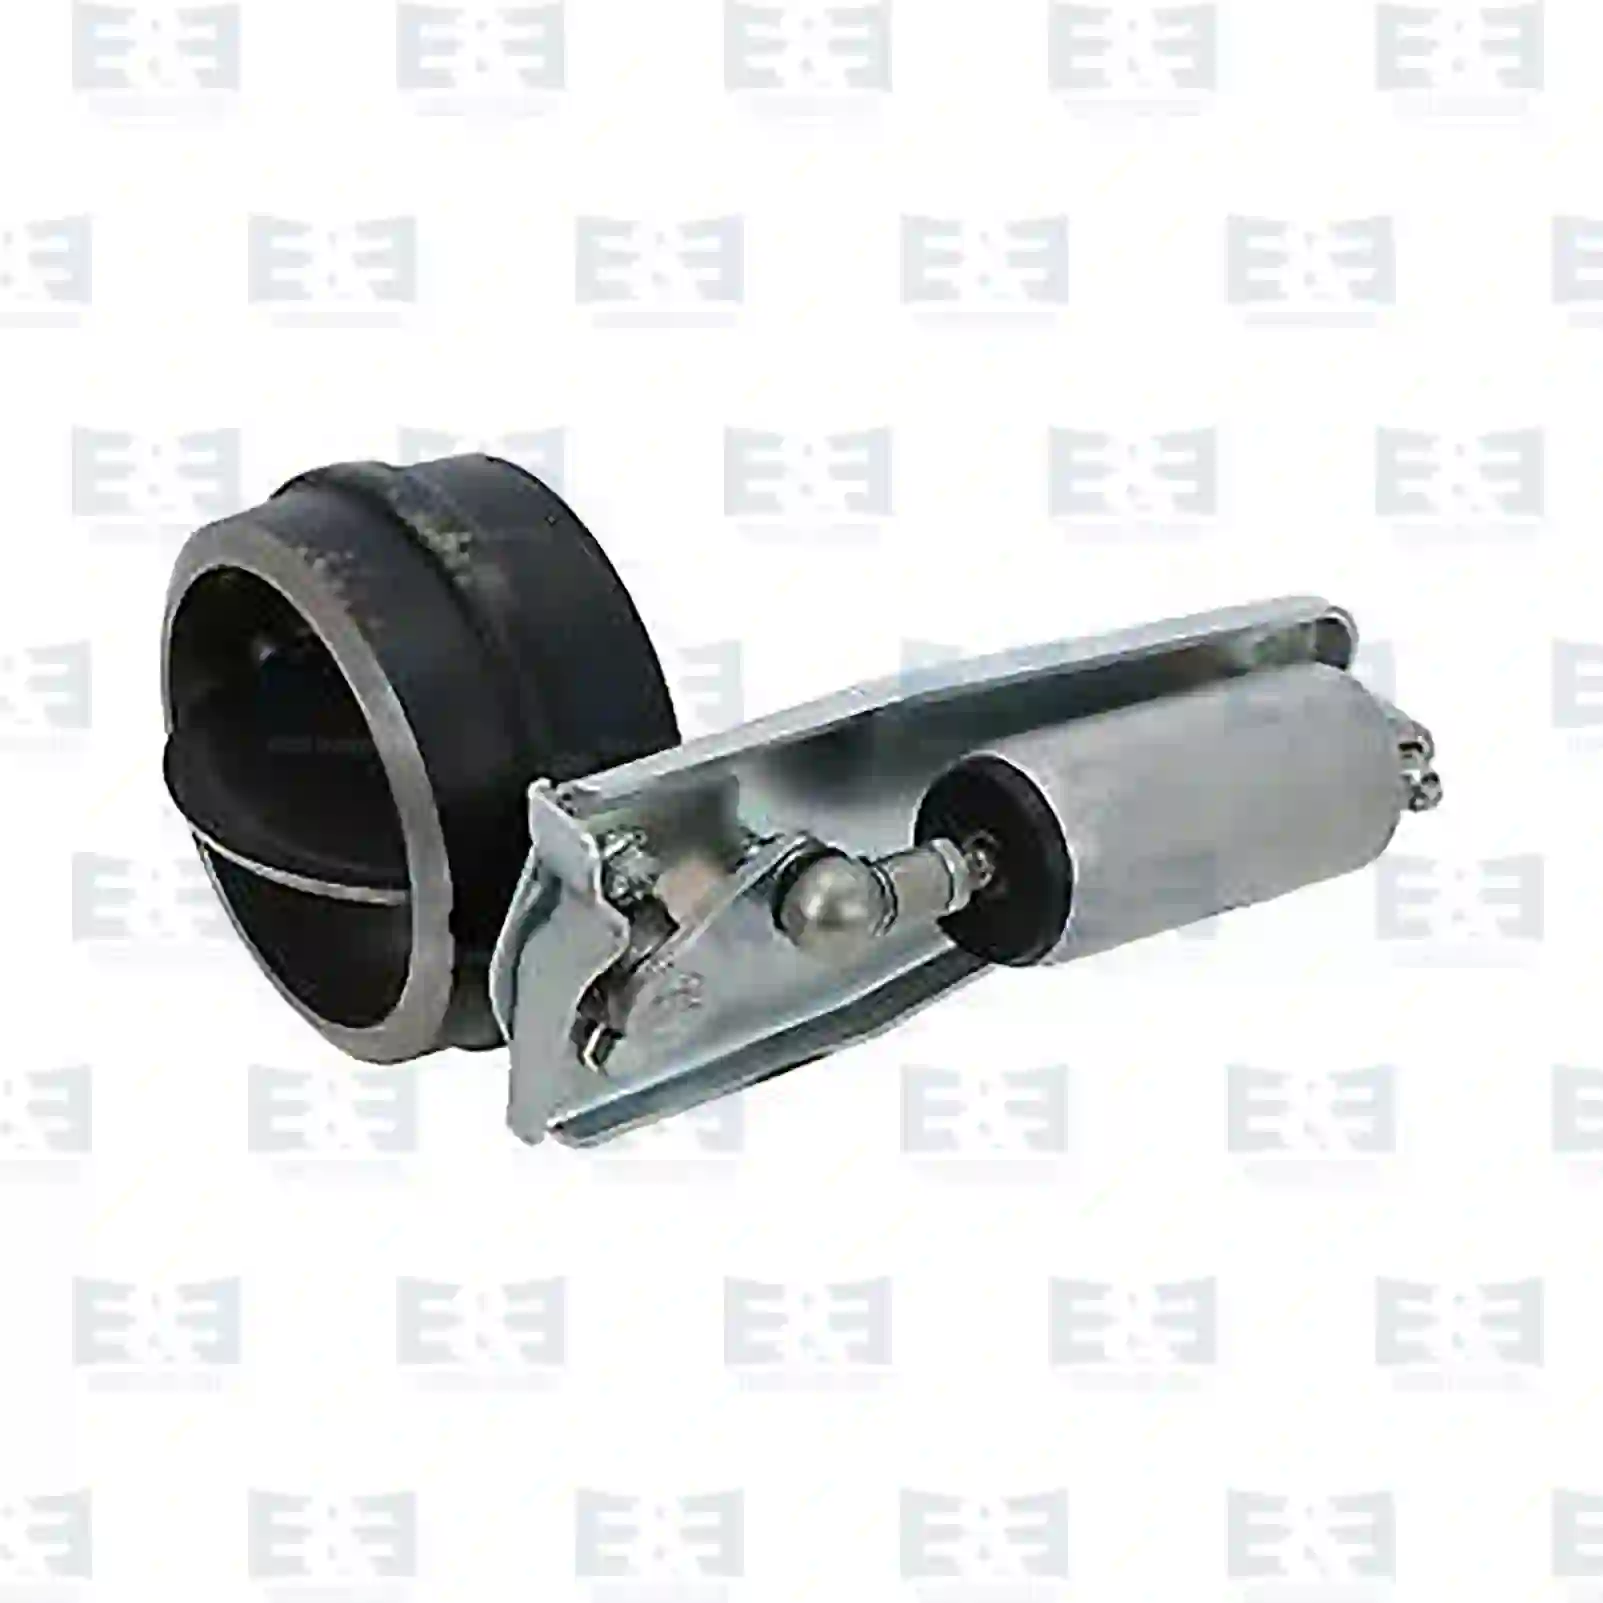  Throttle, complete with cylinder || E&E Truck Spare Parts | Truck Spare Parts, Auotomotive Spare Parts